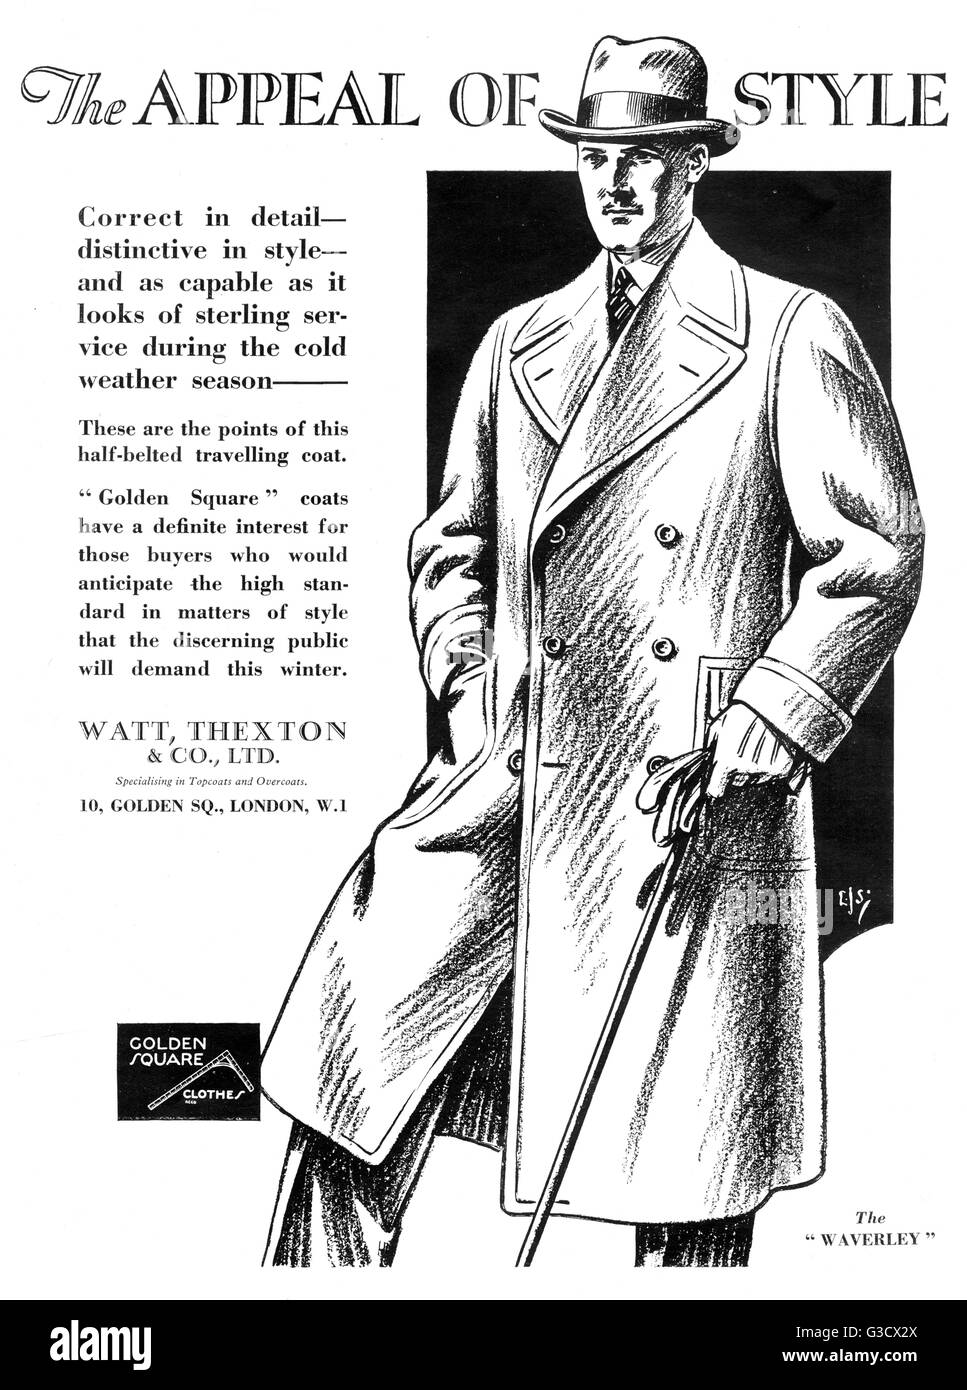 Advertisement for Golden Square clothes manufactured by Watt, Thexton and Co who specialised in overcoats and topcoats.  This half-belted travelling coat is described as, 'correct in detail - distinctive in style - and as capable as it looks of sterling s Stock Photo